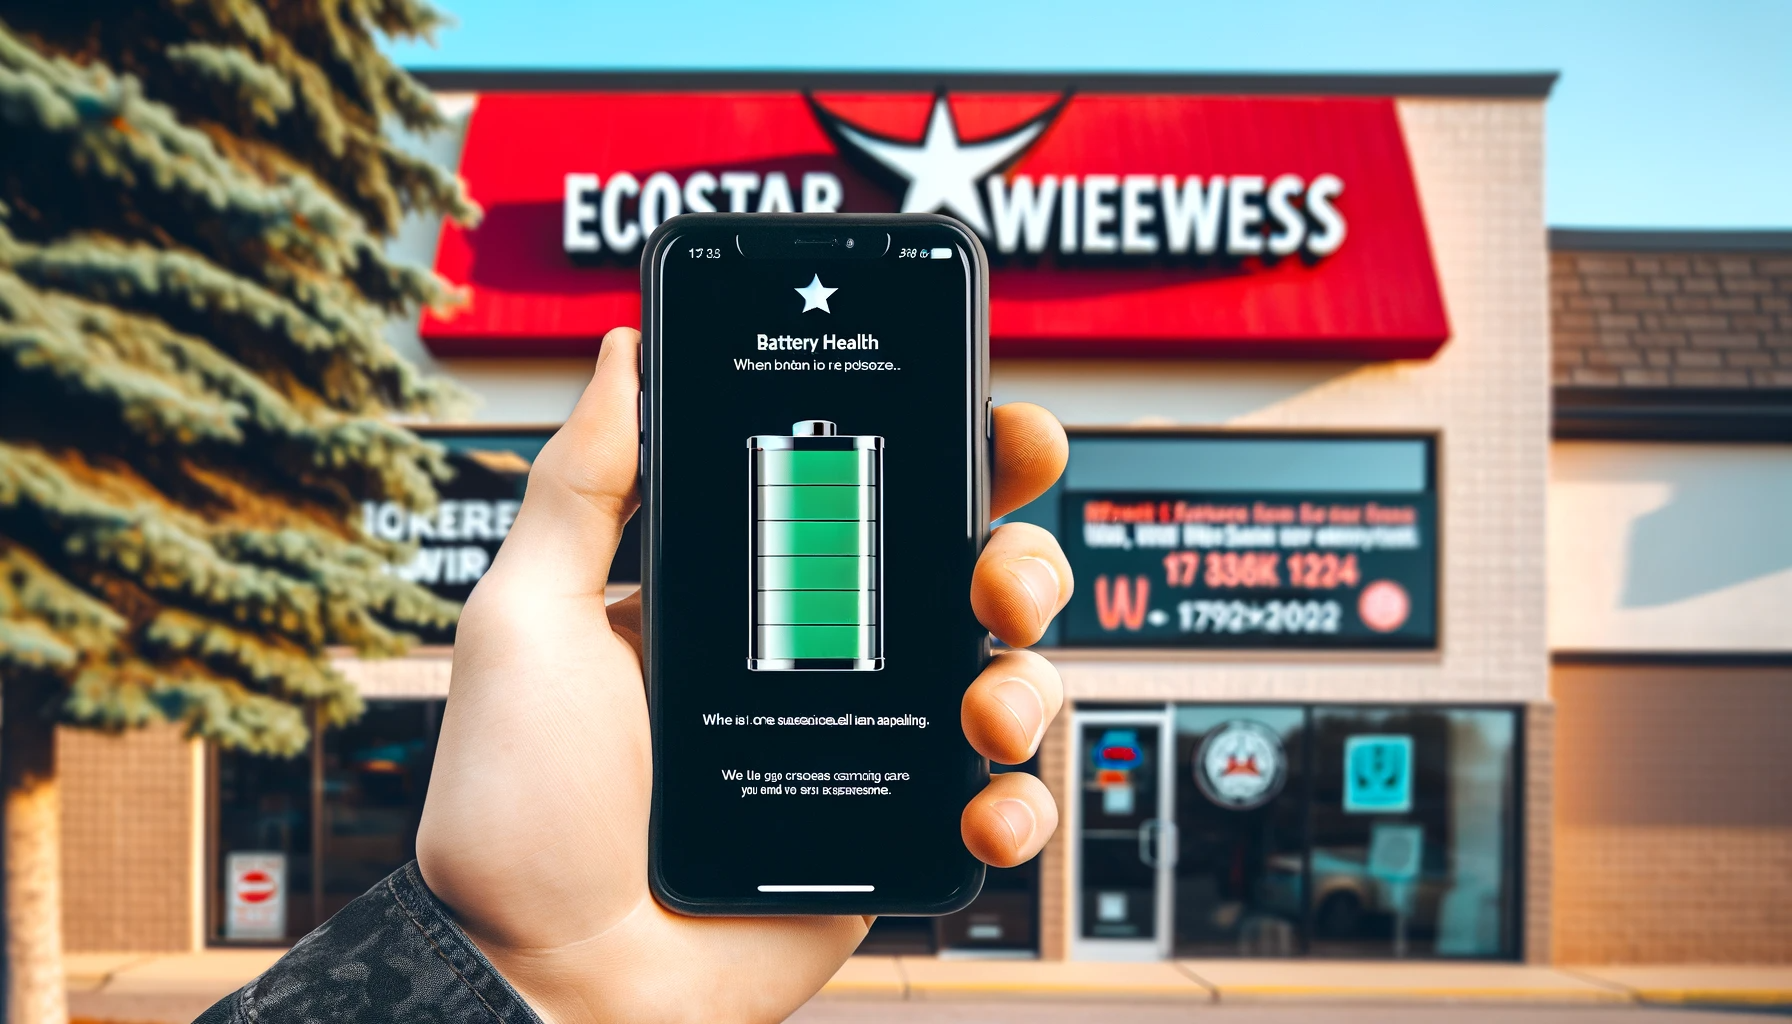 Person holding an iPhone showing battery health screen, with Ecostar Wireless sign in the background.